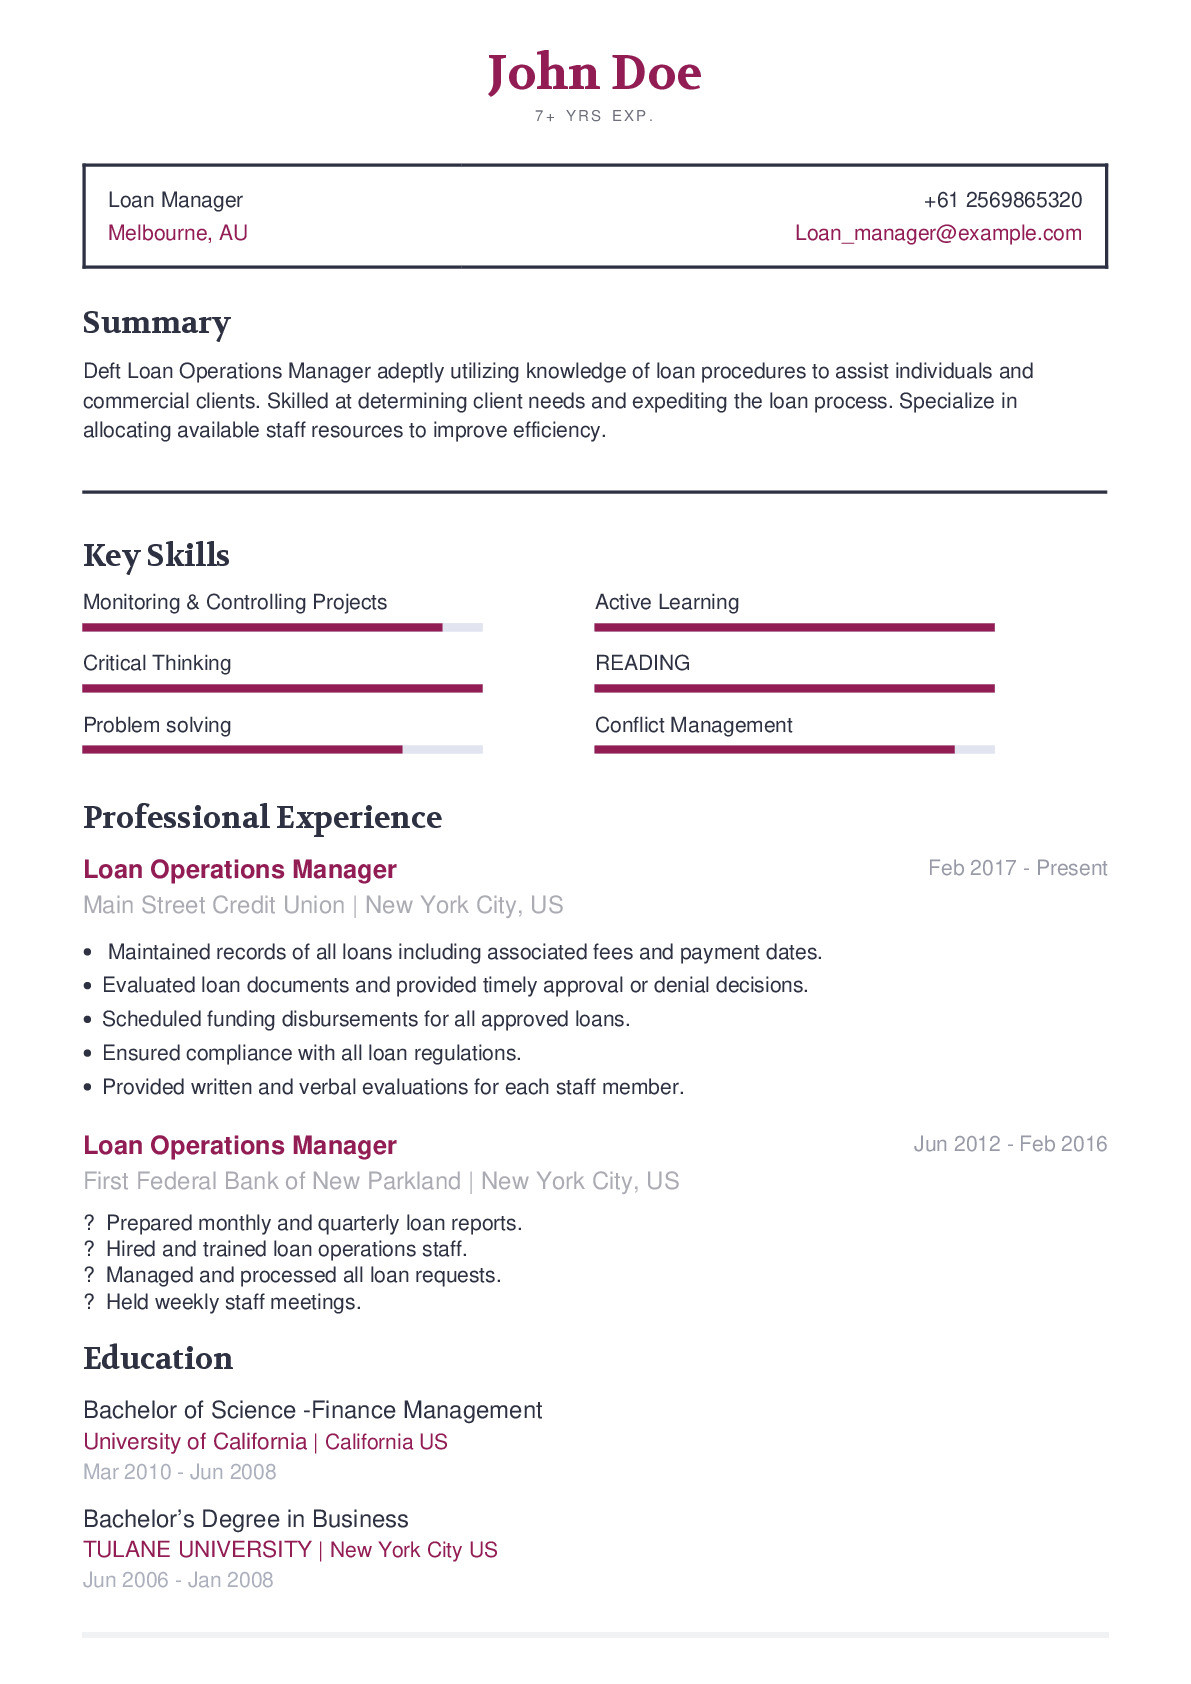 Business Control Mortgage Executive Resume Samples Loan Manager Resume Example with Content Sample Craftmycv